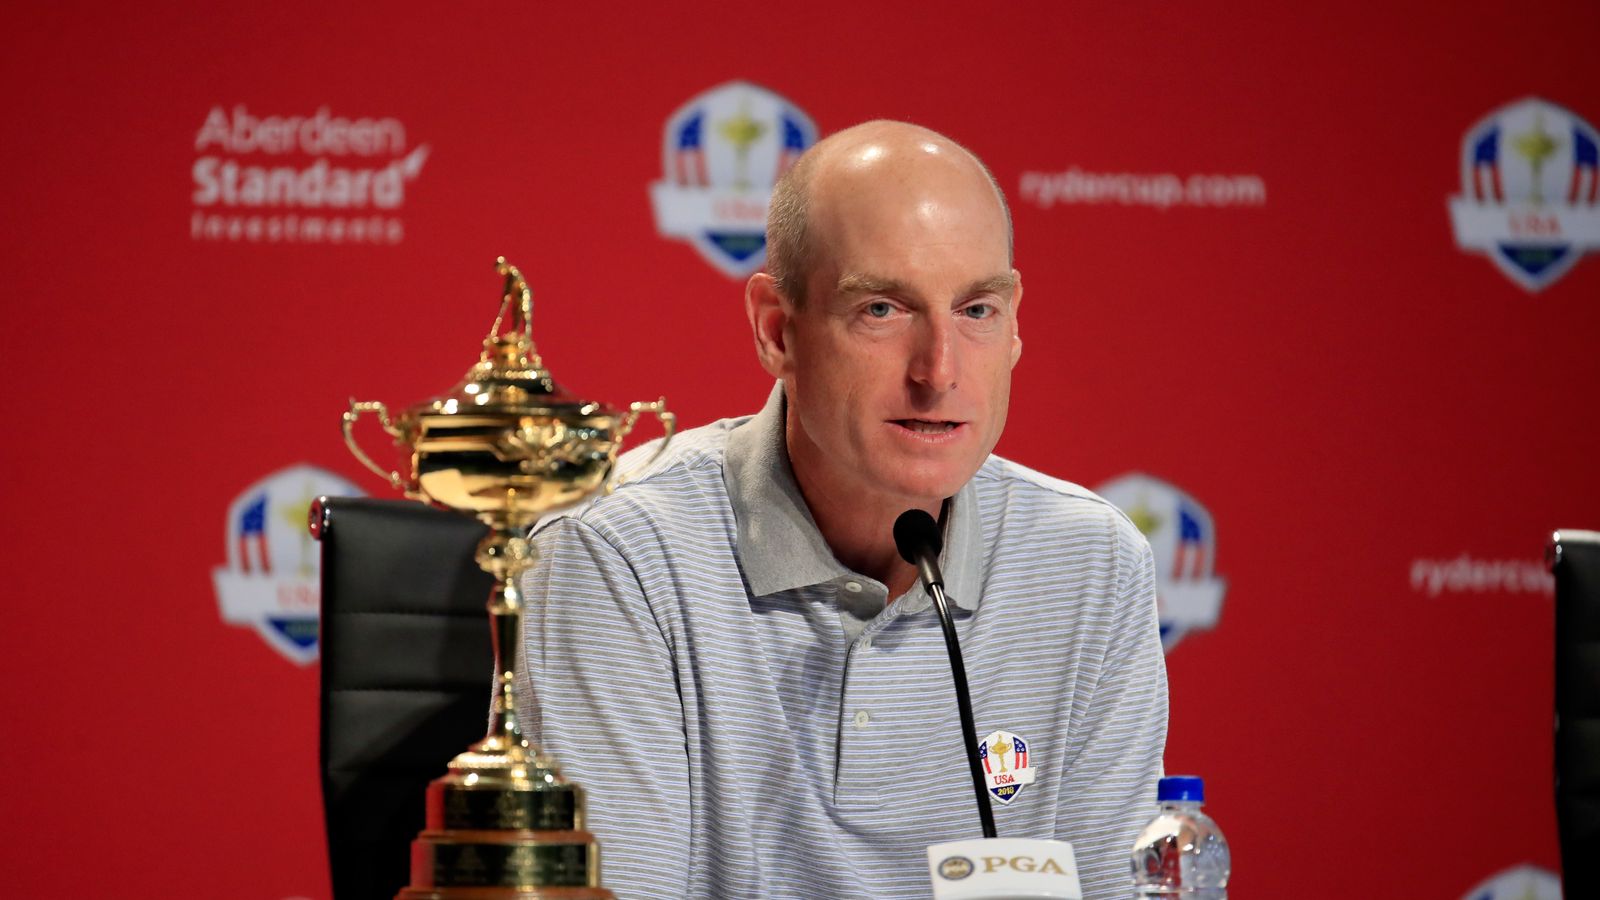 Ryder Cup USA captain Jim Furyk to name first three wildcard picks